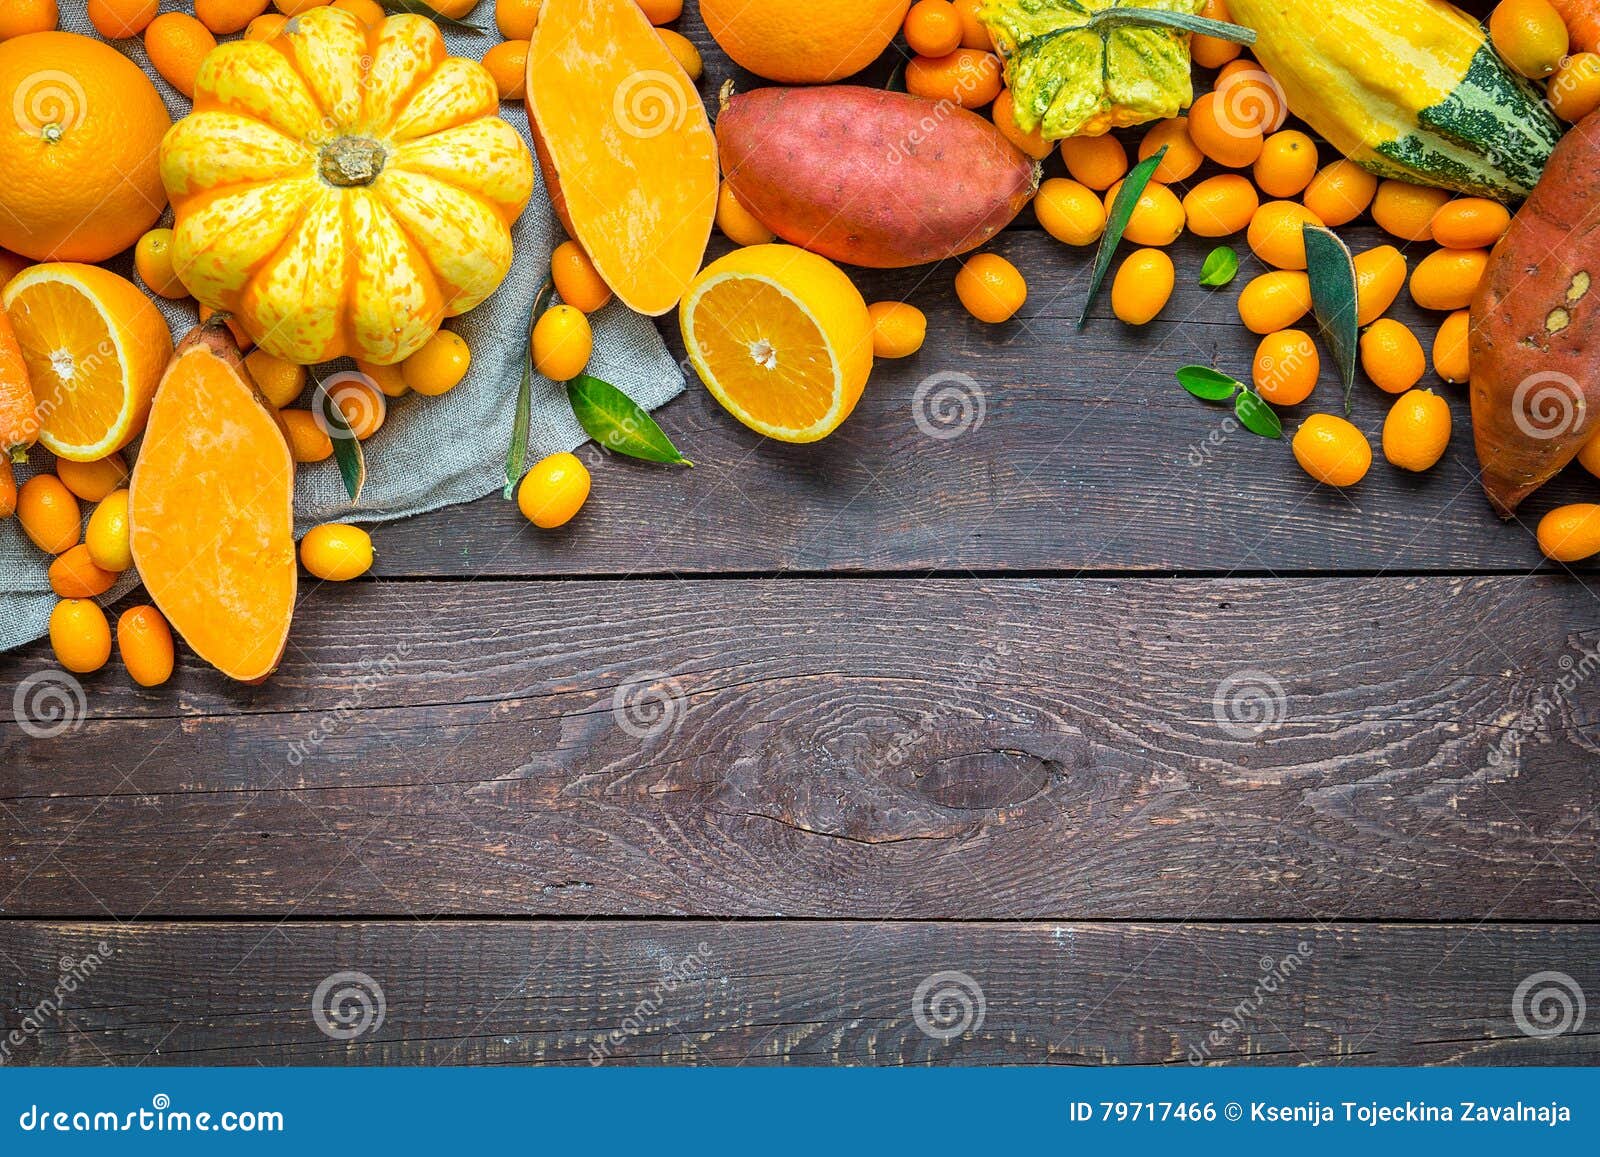 Thanksgiving Autumn Background, Variety of Orange Fruits and Vegetables ...